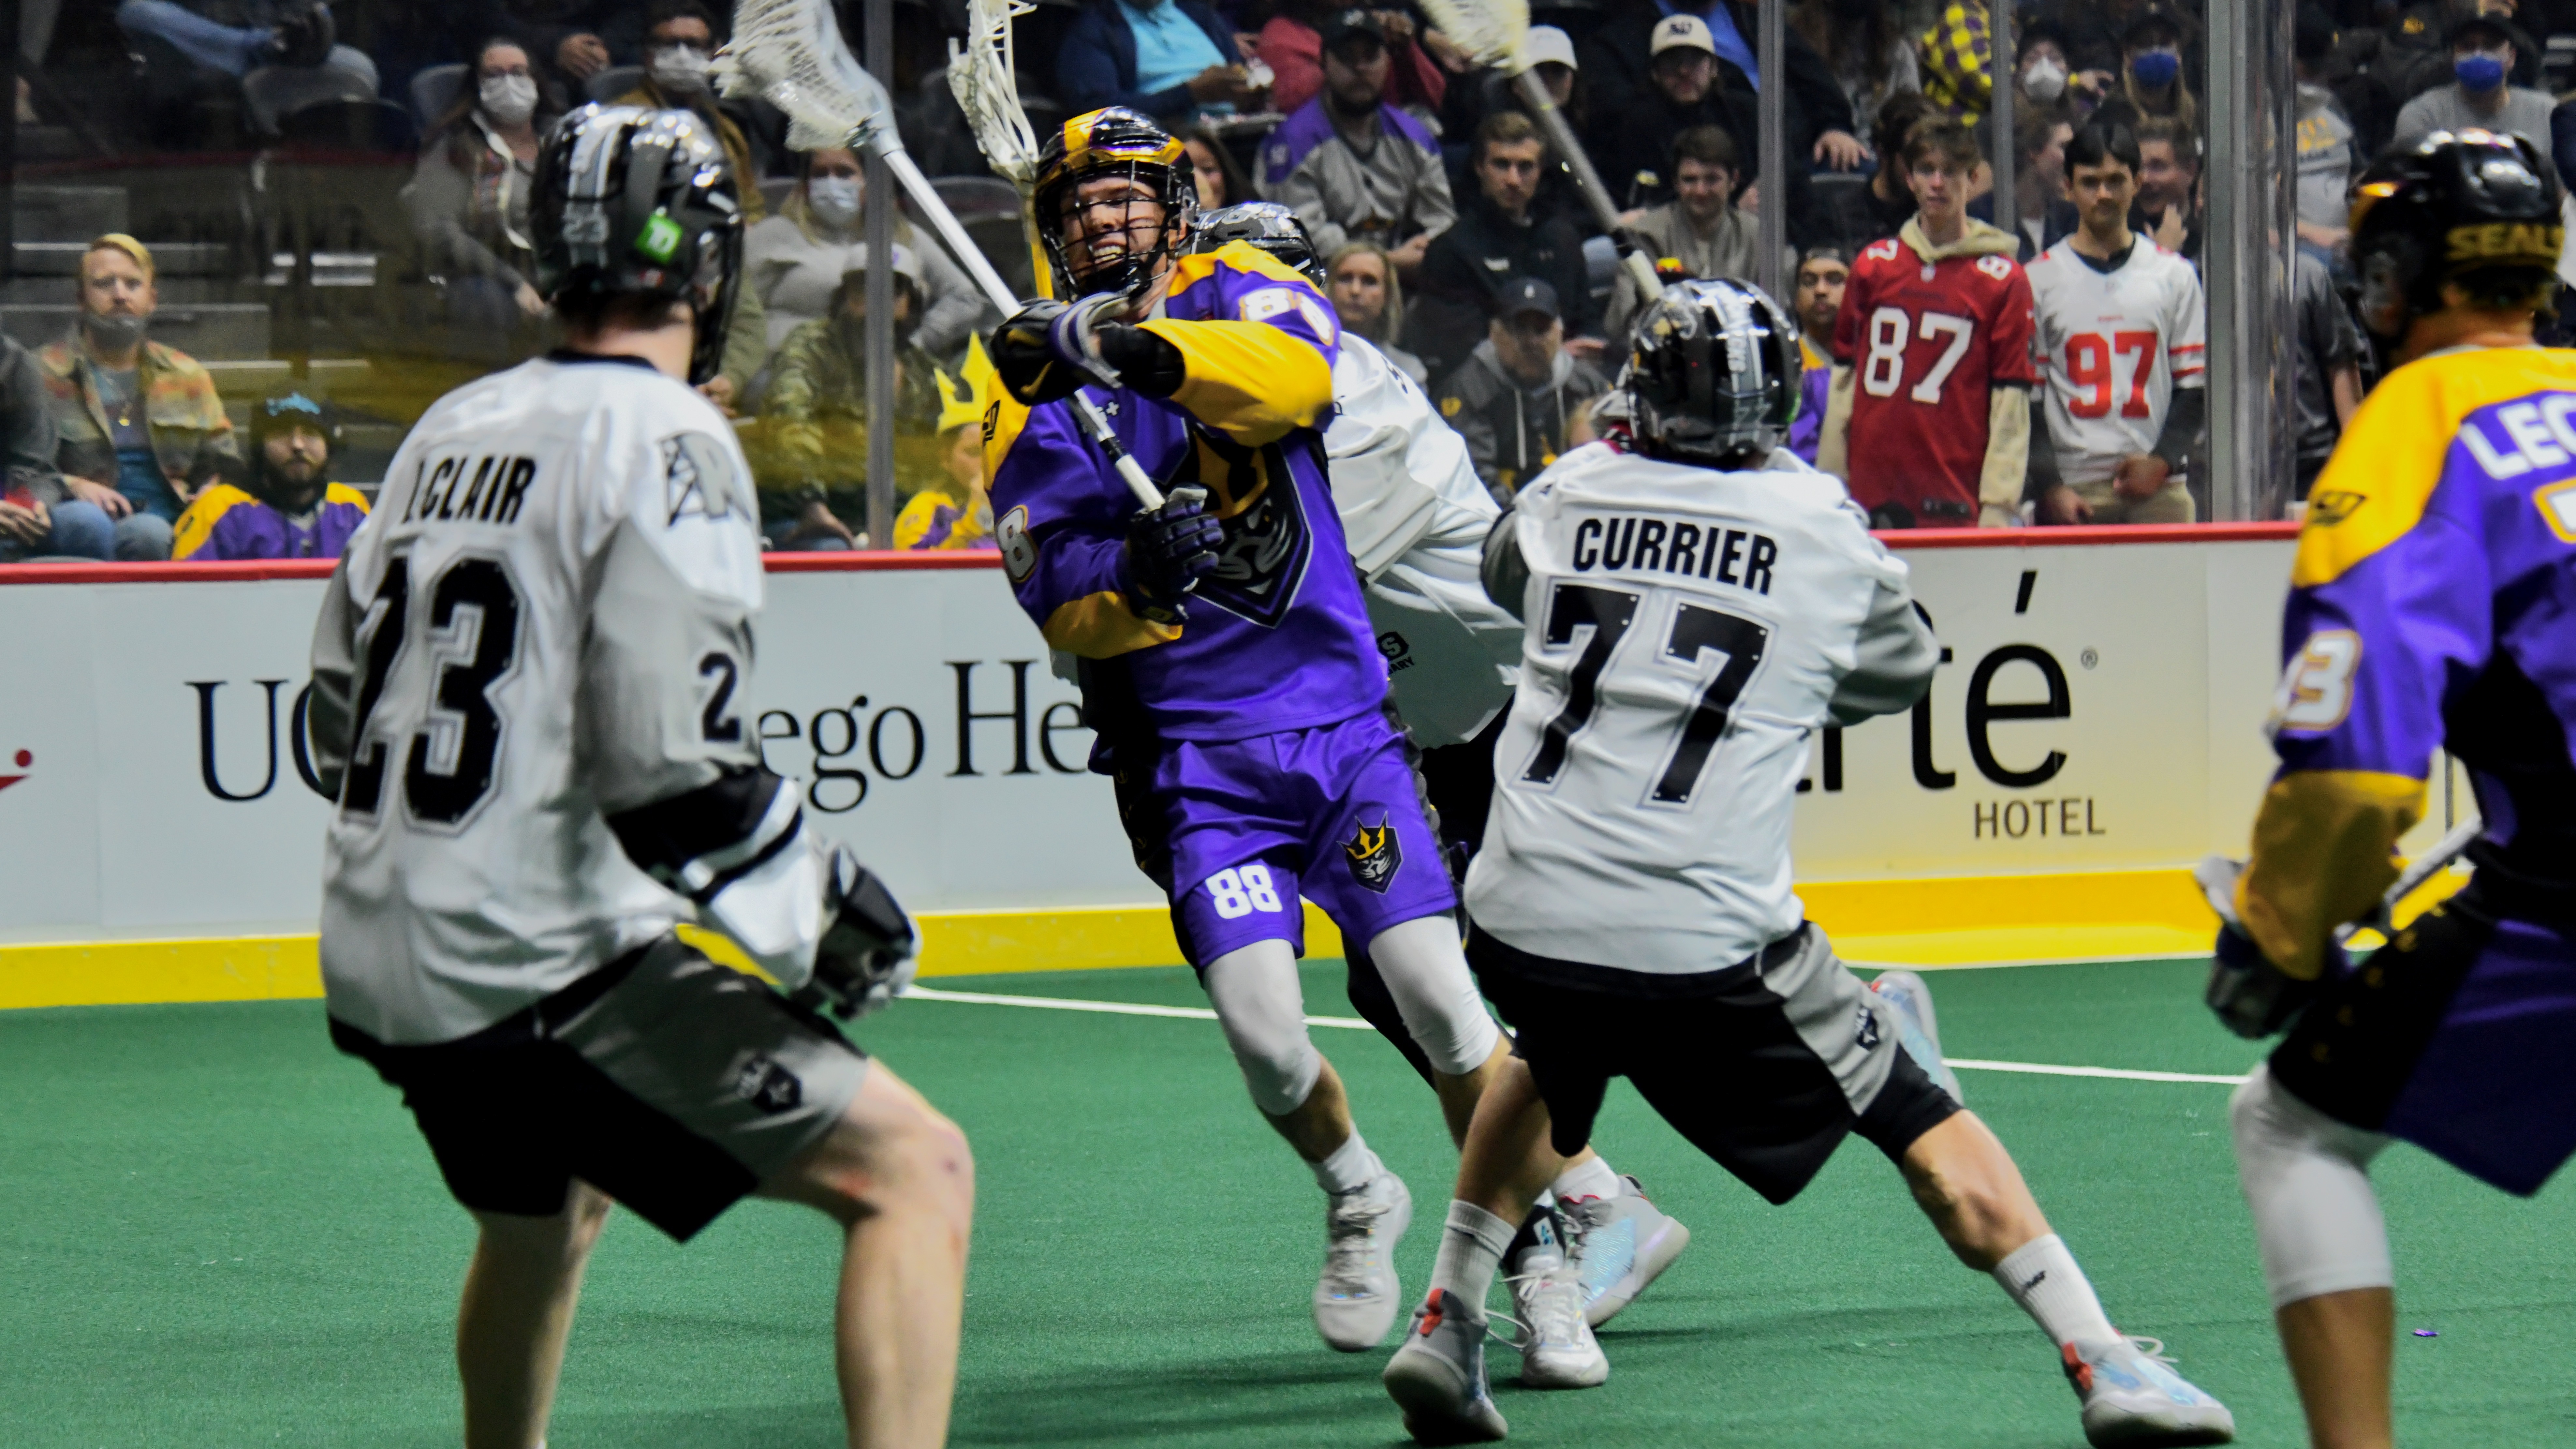 Zack Greer takes a shot on the goal against the Calgary Roughnecks in San Diego’s 13-10 victory.